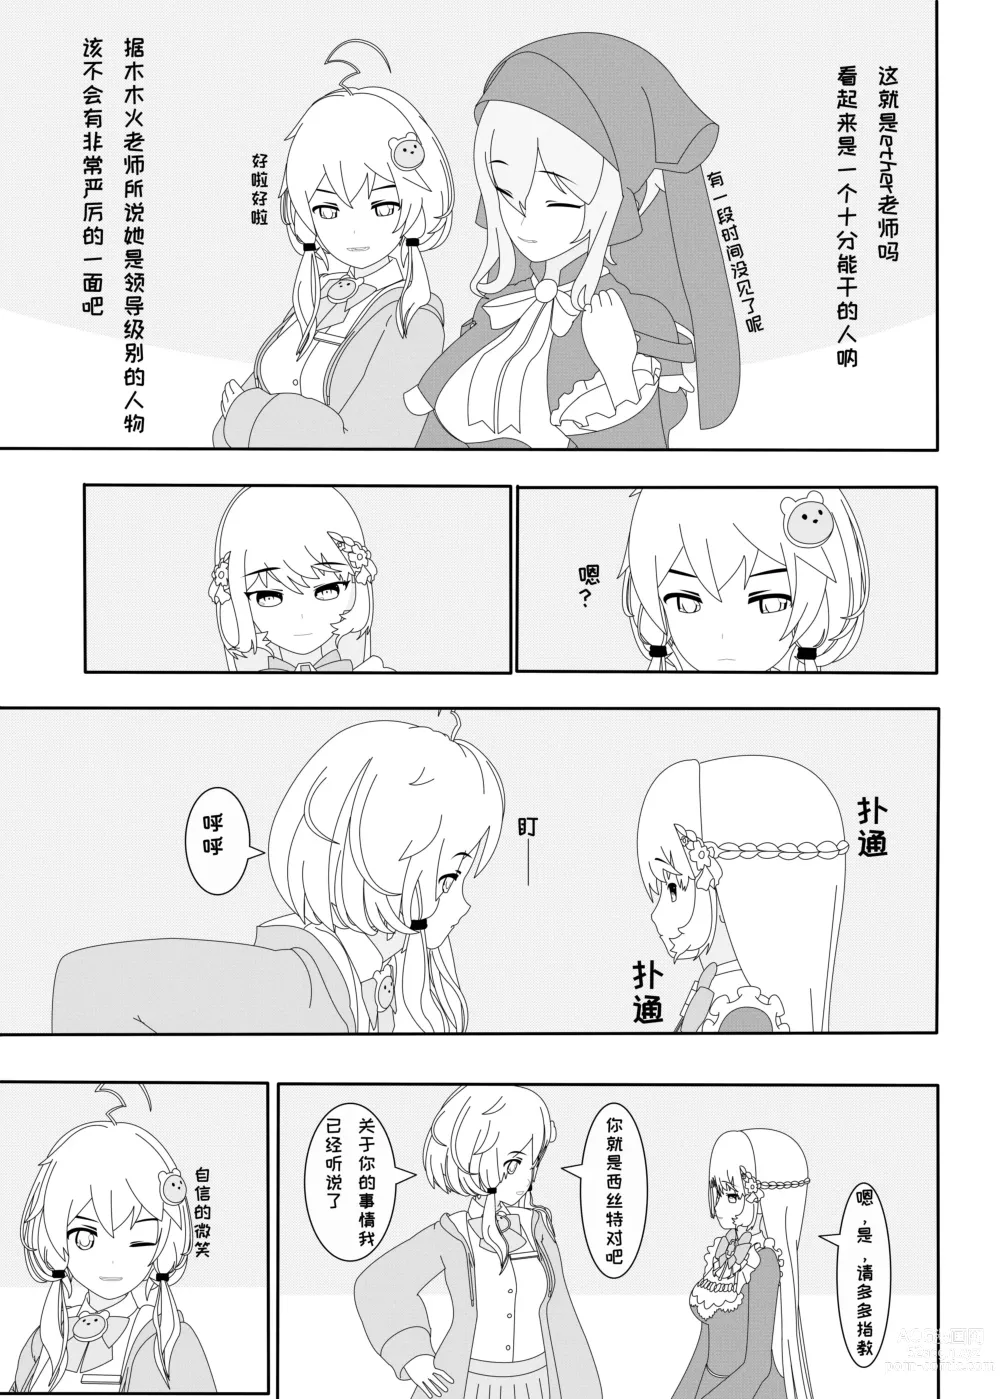 Page 4 of doujinshi 鲸之恋2（西丝特Xether）